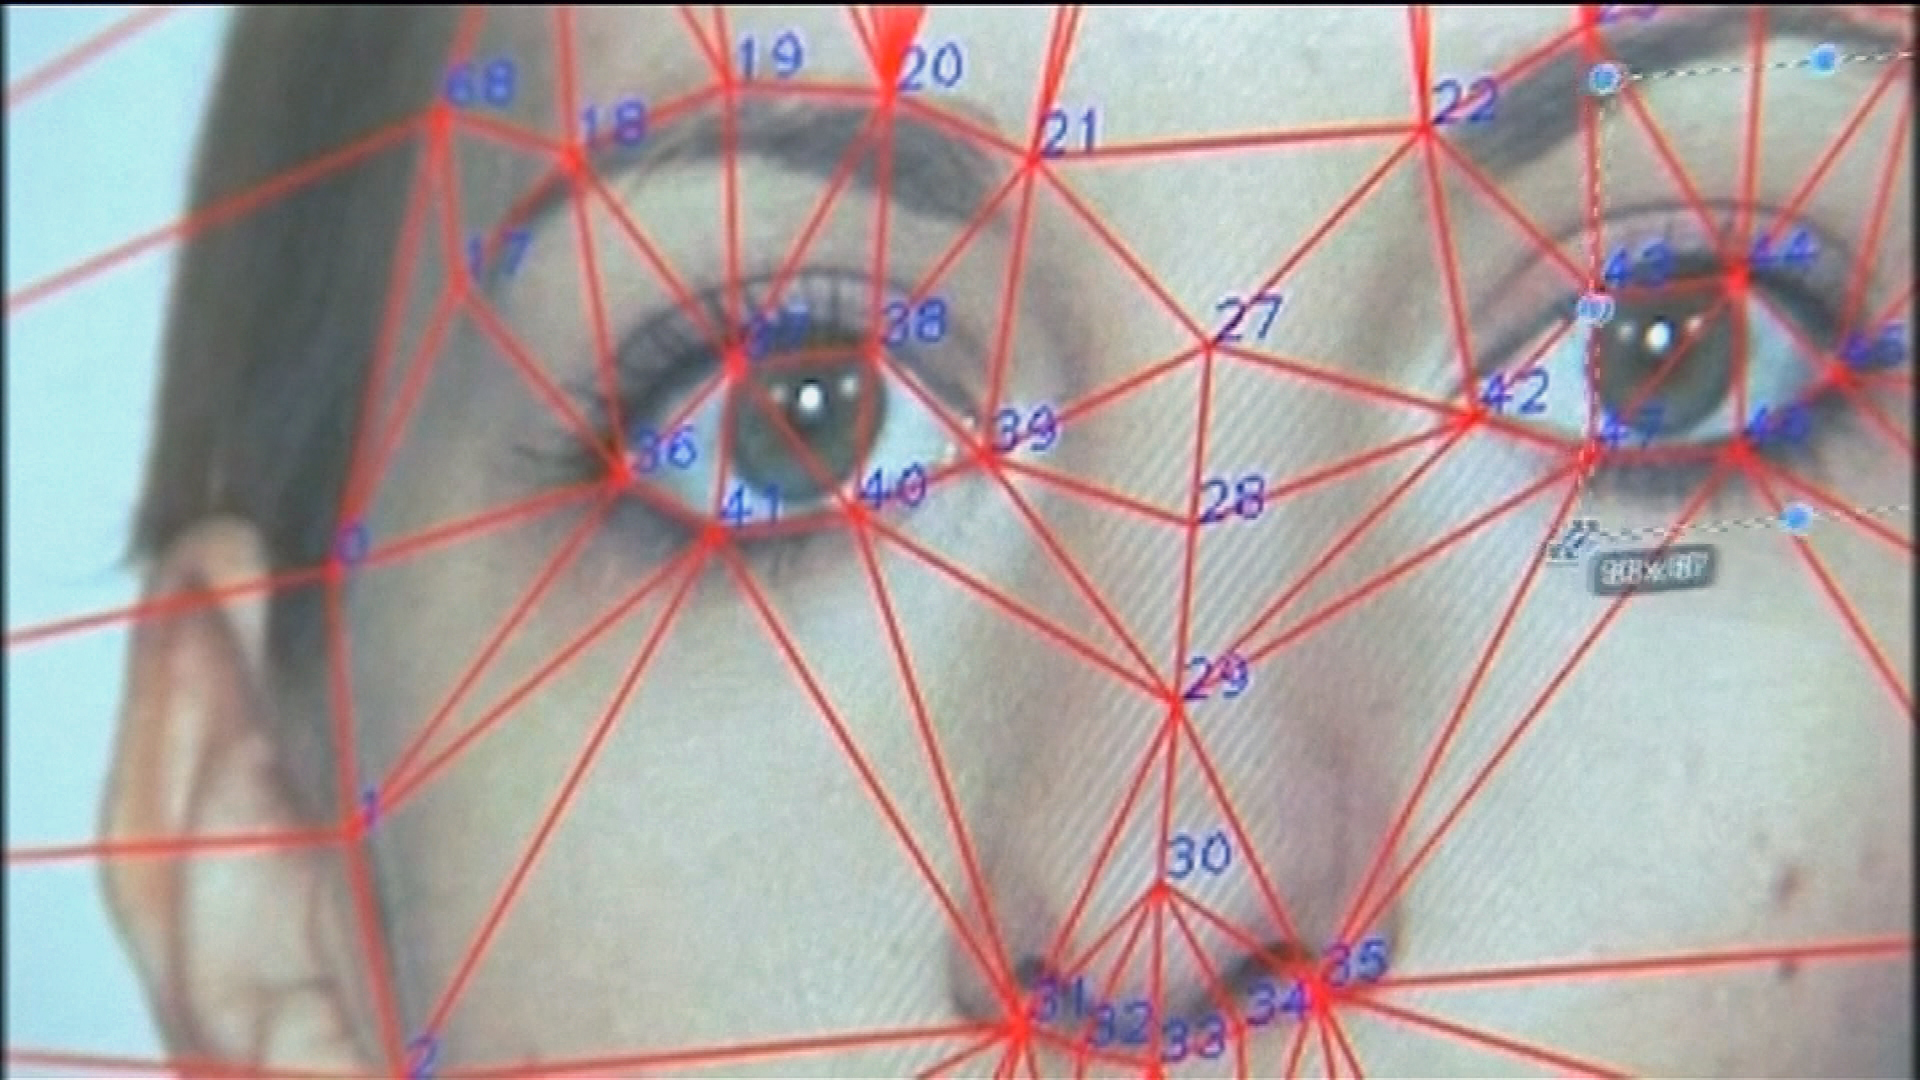 The Finnish police denied and then granted the controversial facial recognition application